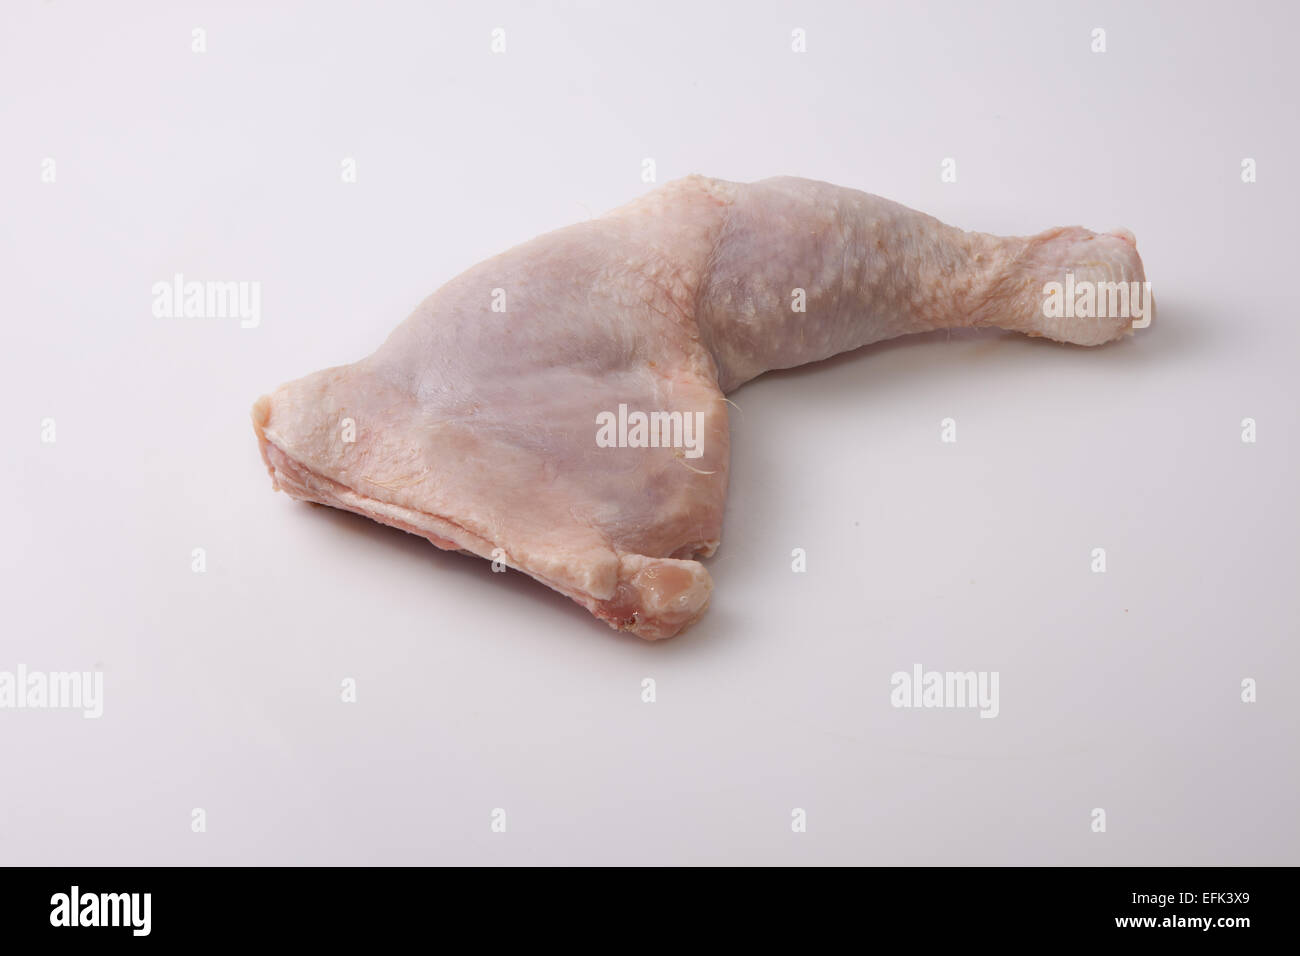 Chicken thigh or leg isolated over white background Stock Photo